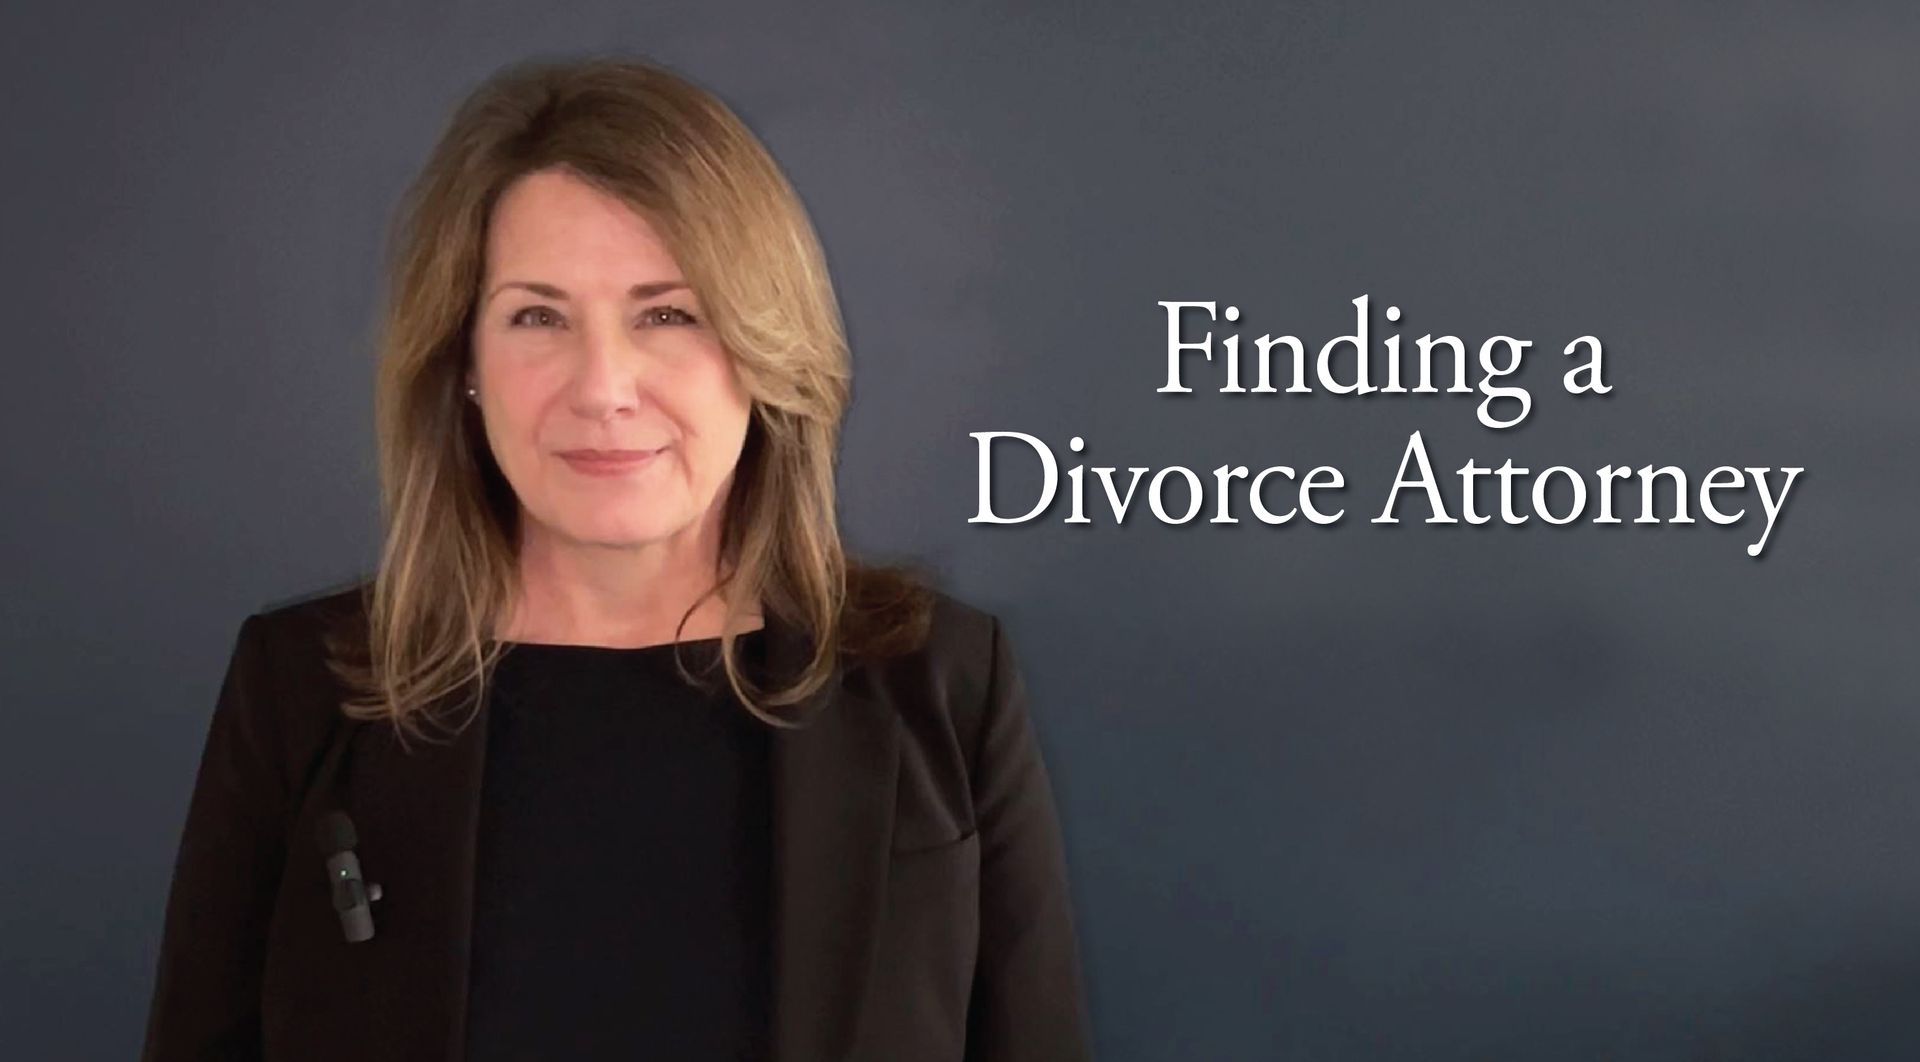 Understand the critical first step in the divorce process – finding the right attorney.